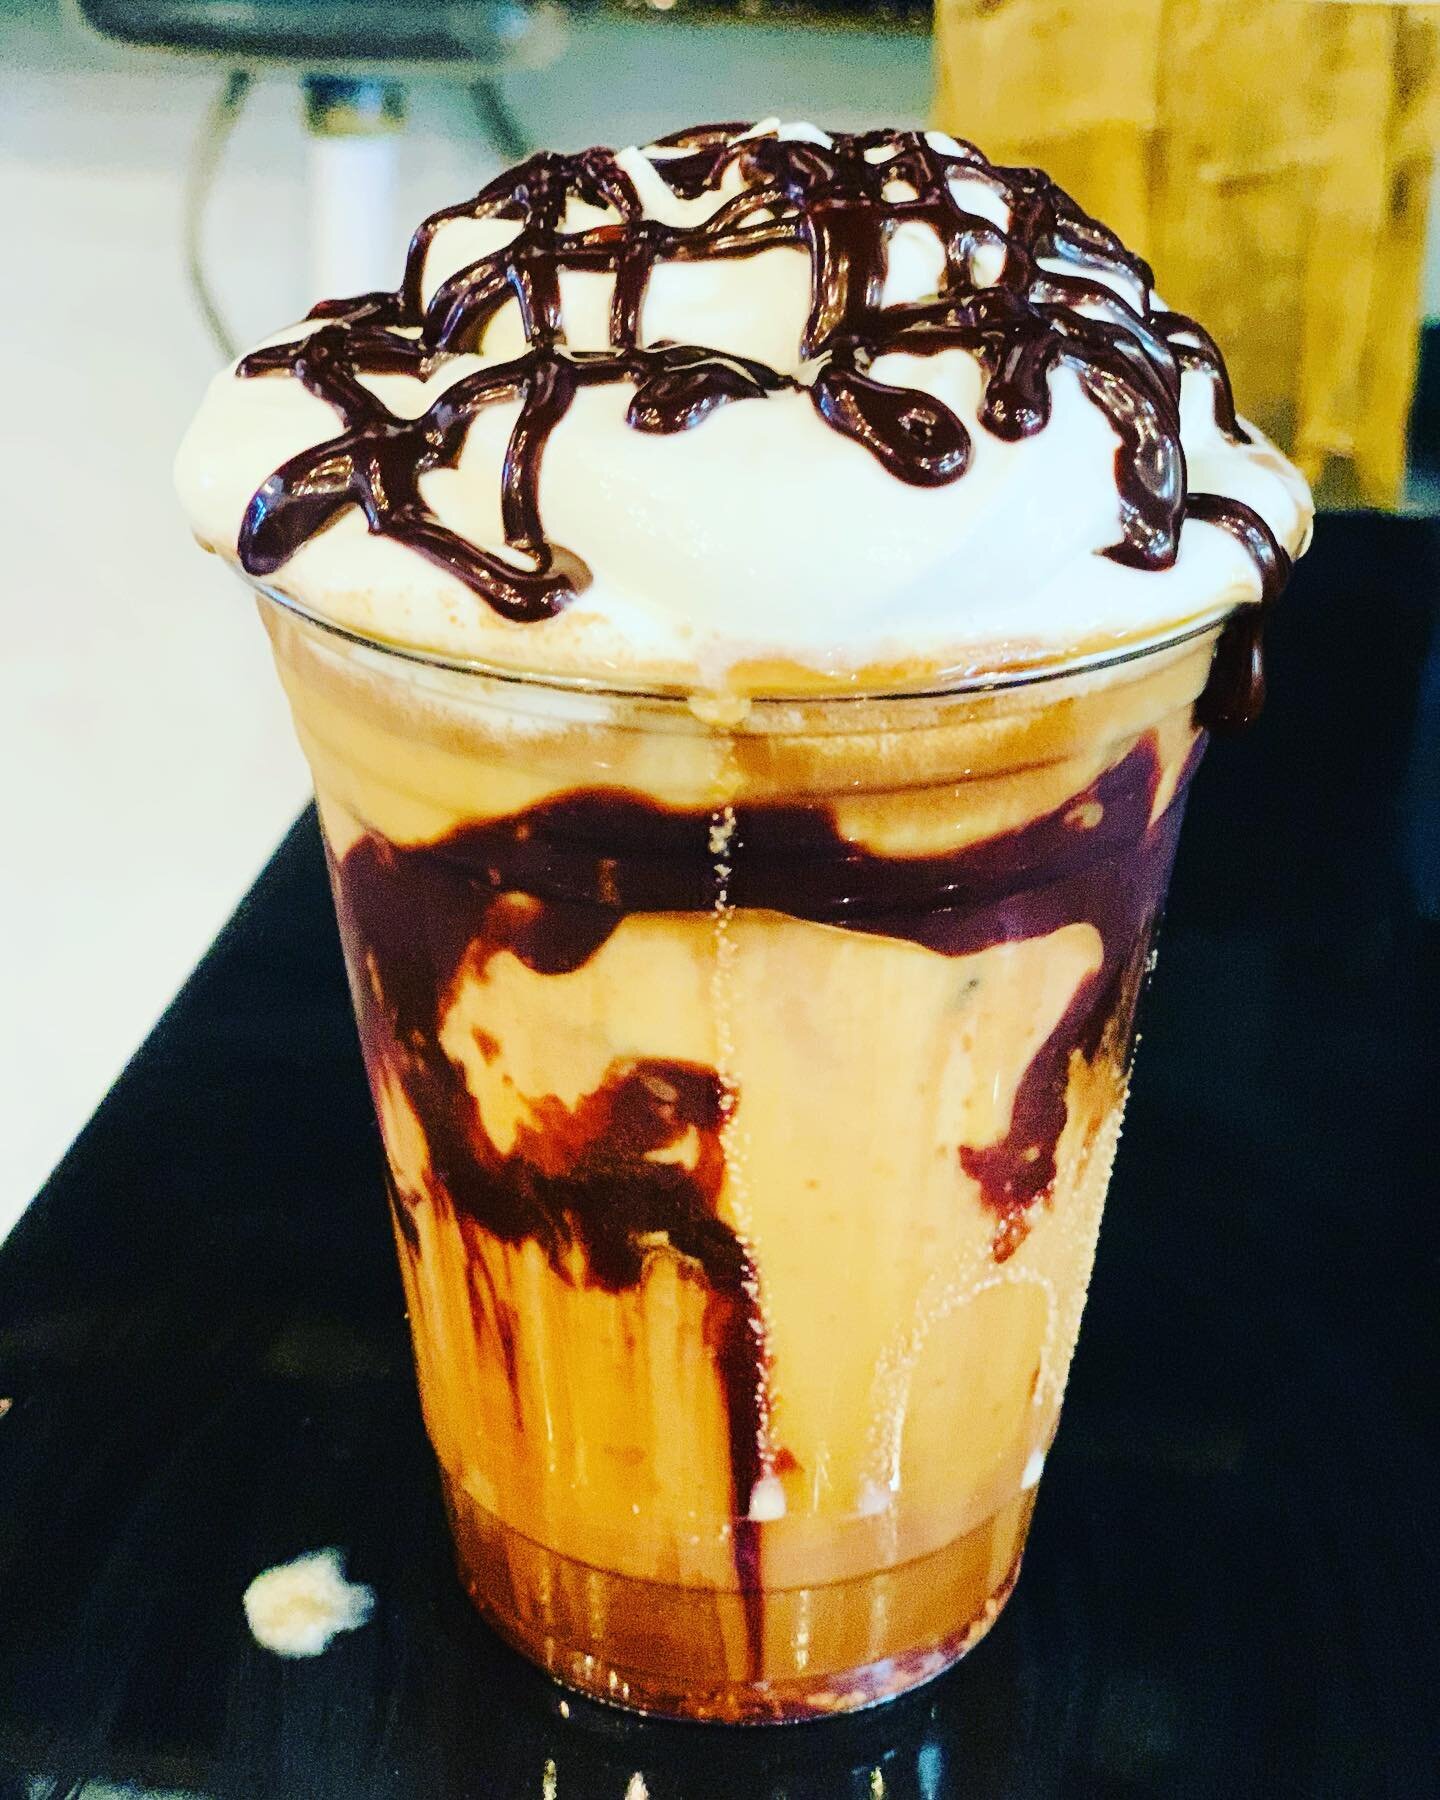 Iced double chocolate 🍫 bar bomb.
#notalkbeforecoffee